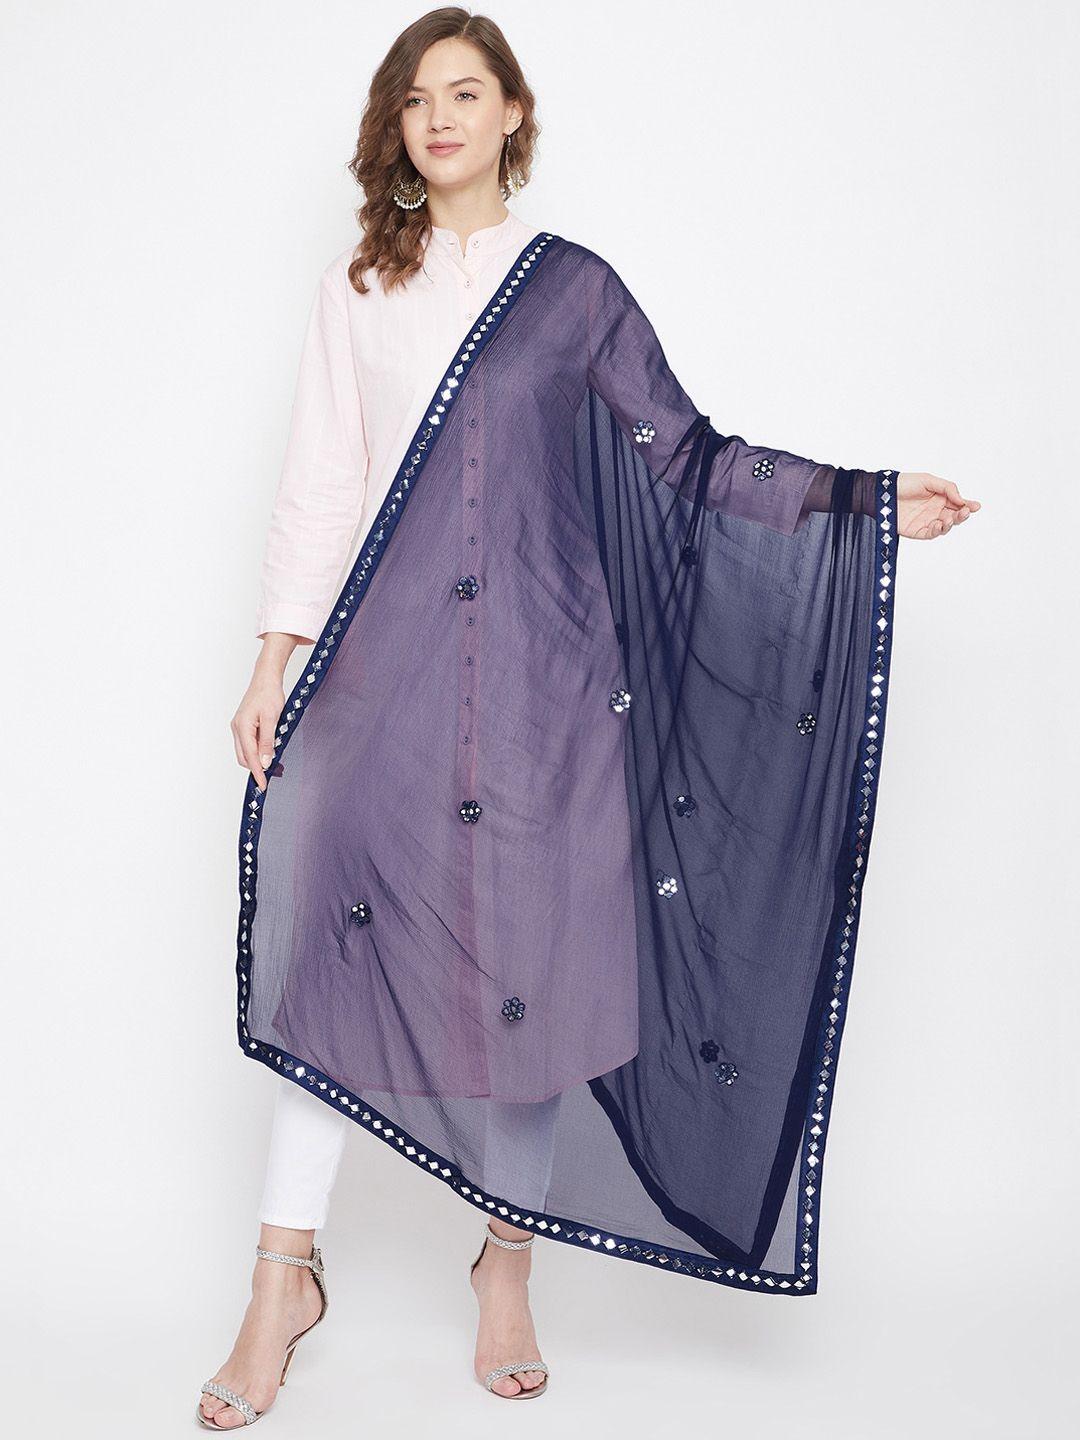 clora creation navy blue & silver-toned solid dupatta